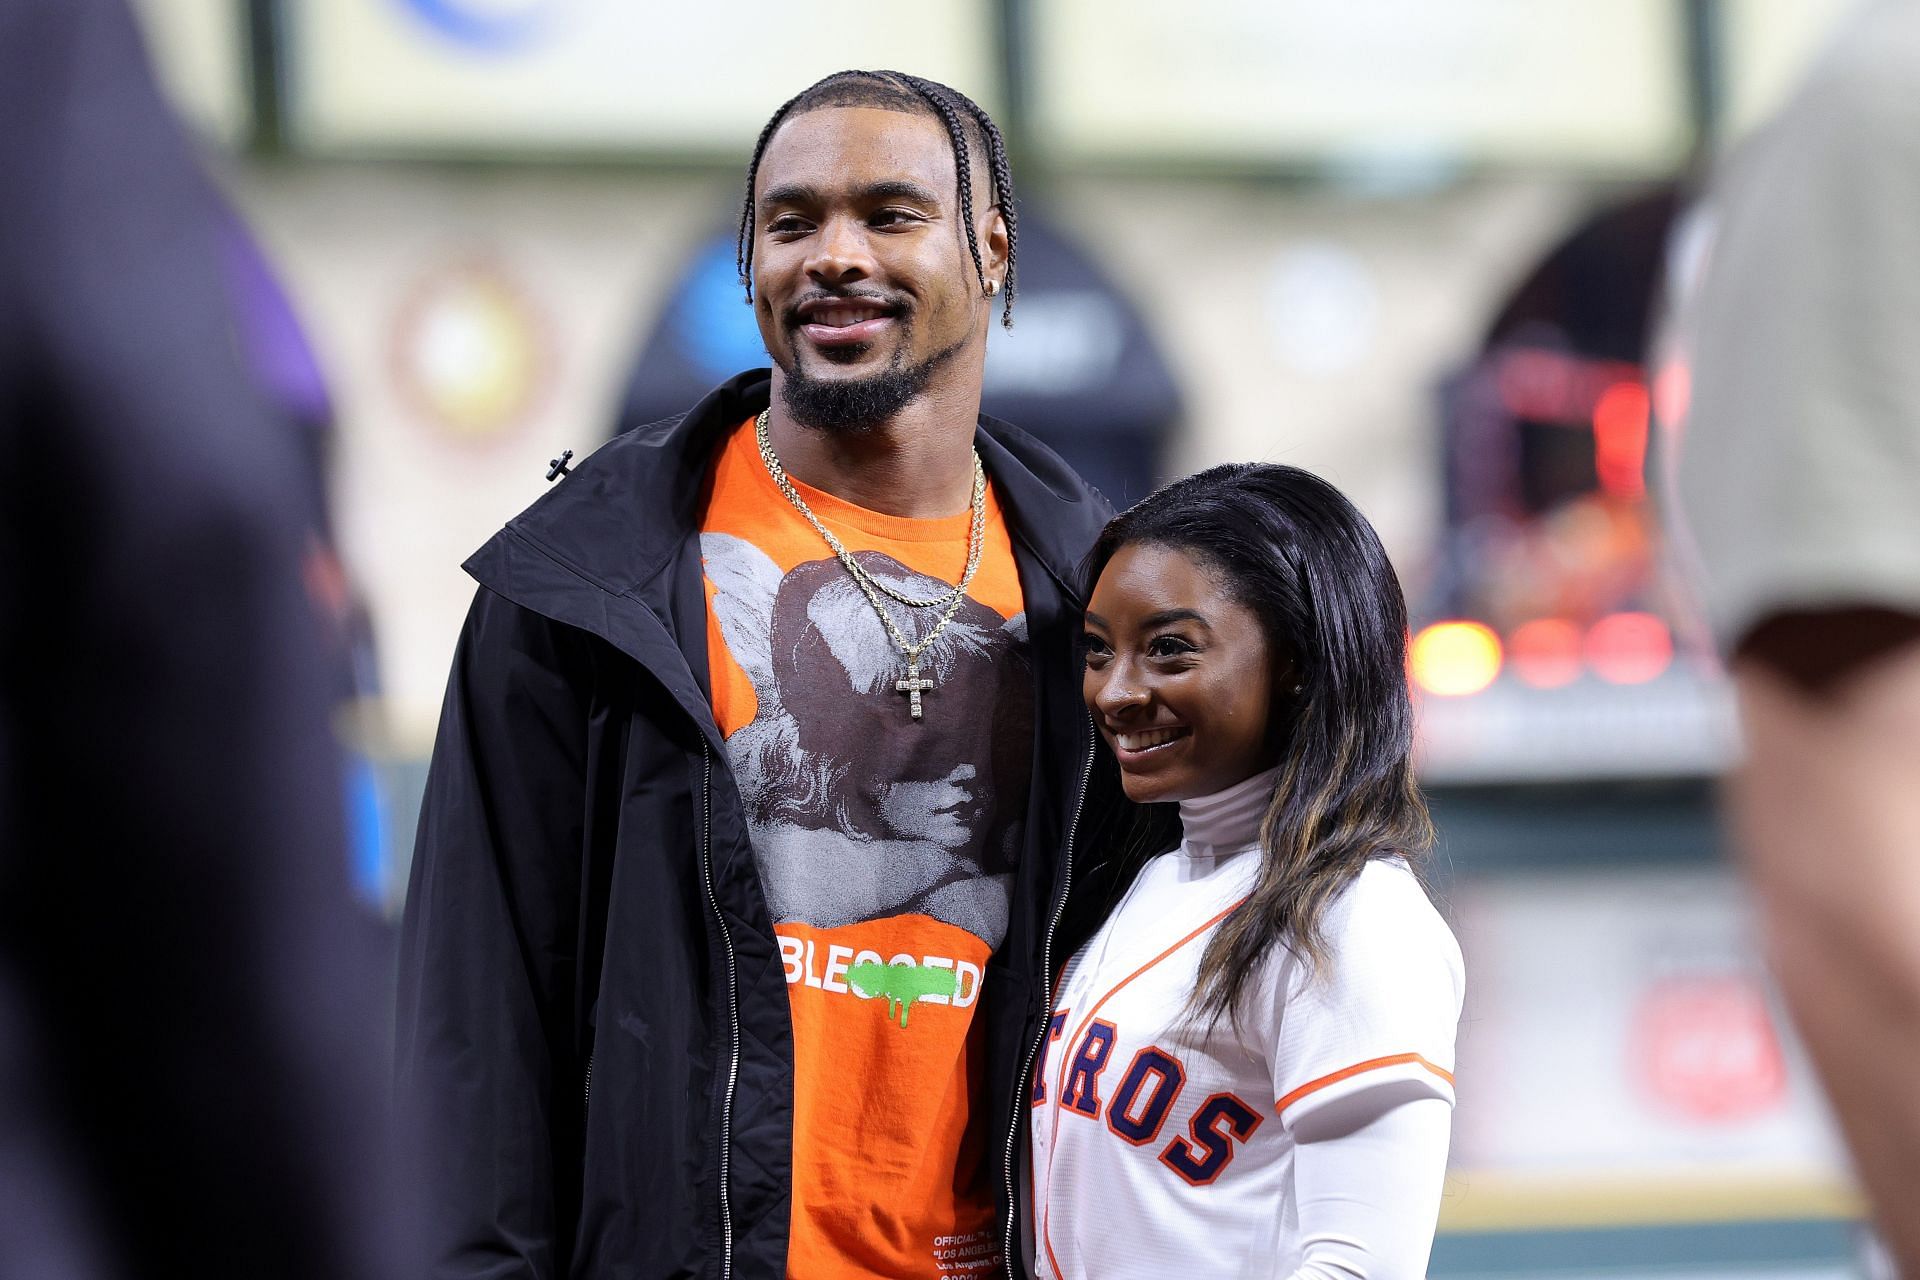 On October 28, 2022, in Houston, Texas, before Game One of the 2022 World Series between the Philadelphia Phillies and the Houston Astros at Minute Maid Park, Biles and Owens pose on the field.